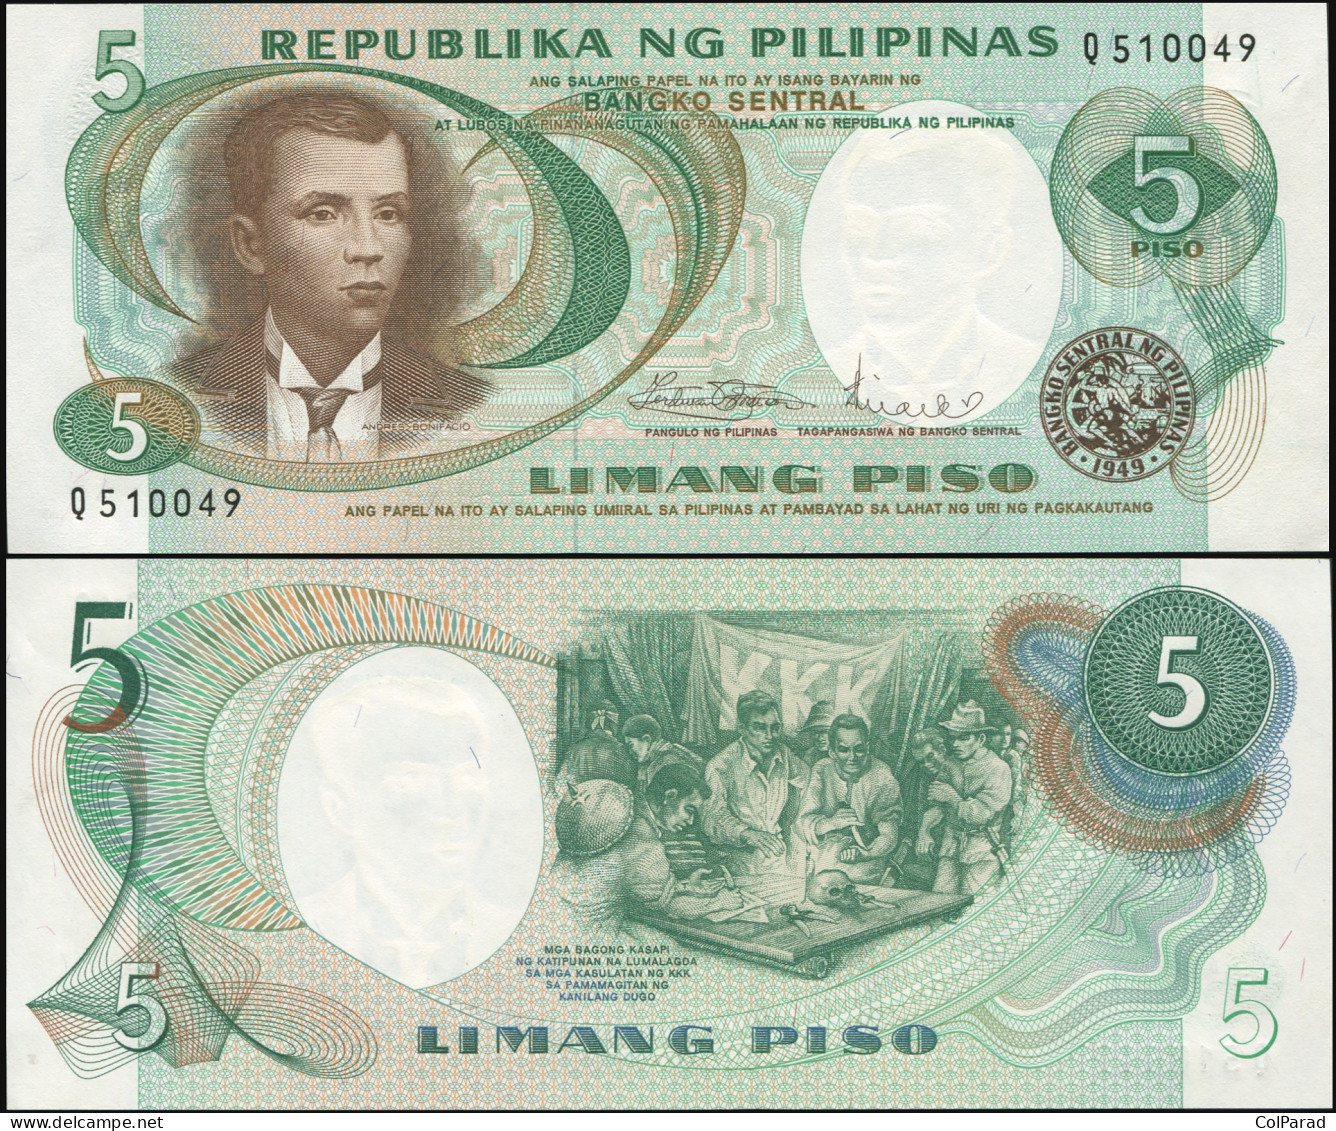 PHILIPPINES 5 PISO - ND (1970) - Paper Unc - P.143b Banknote - Filipinas